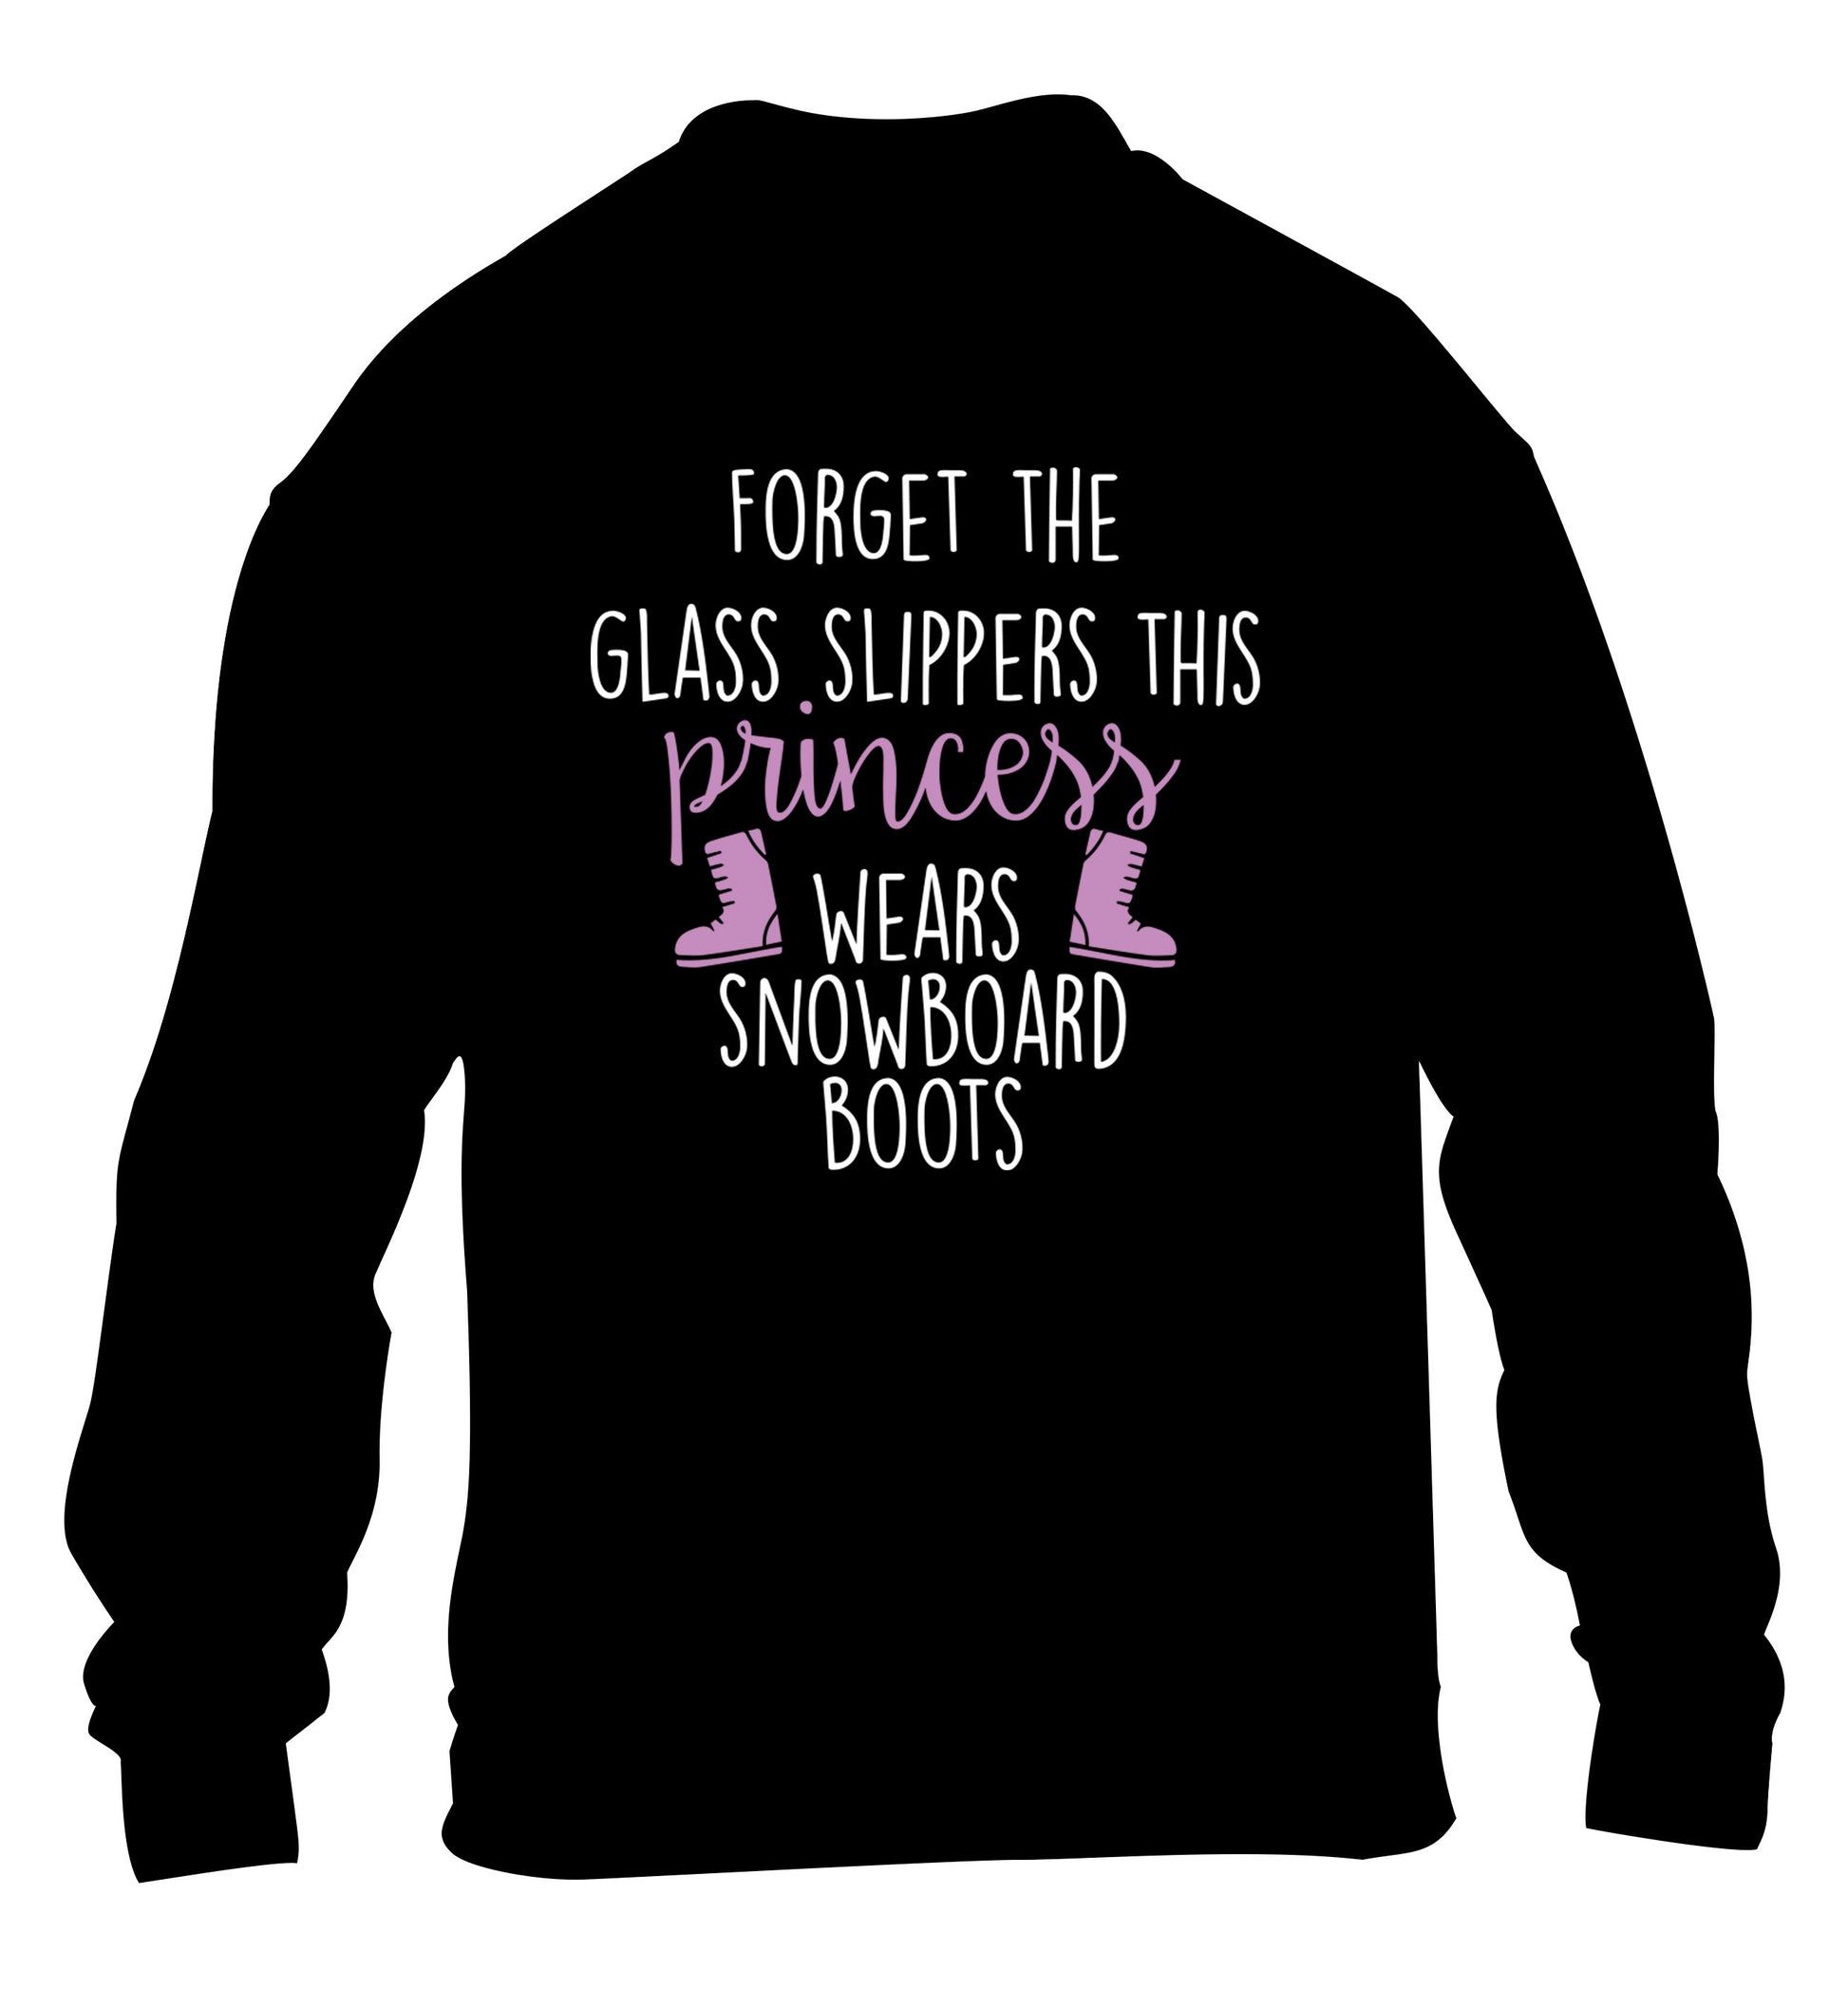 Forget the glass slippers this princess wears snowboard boots children's black sweater 12-14 Years